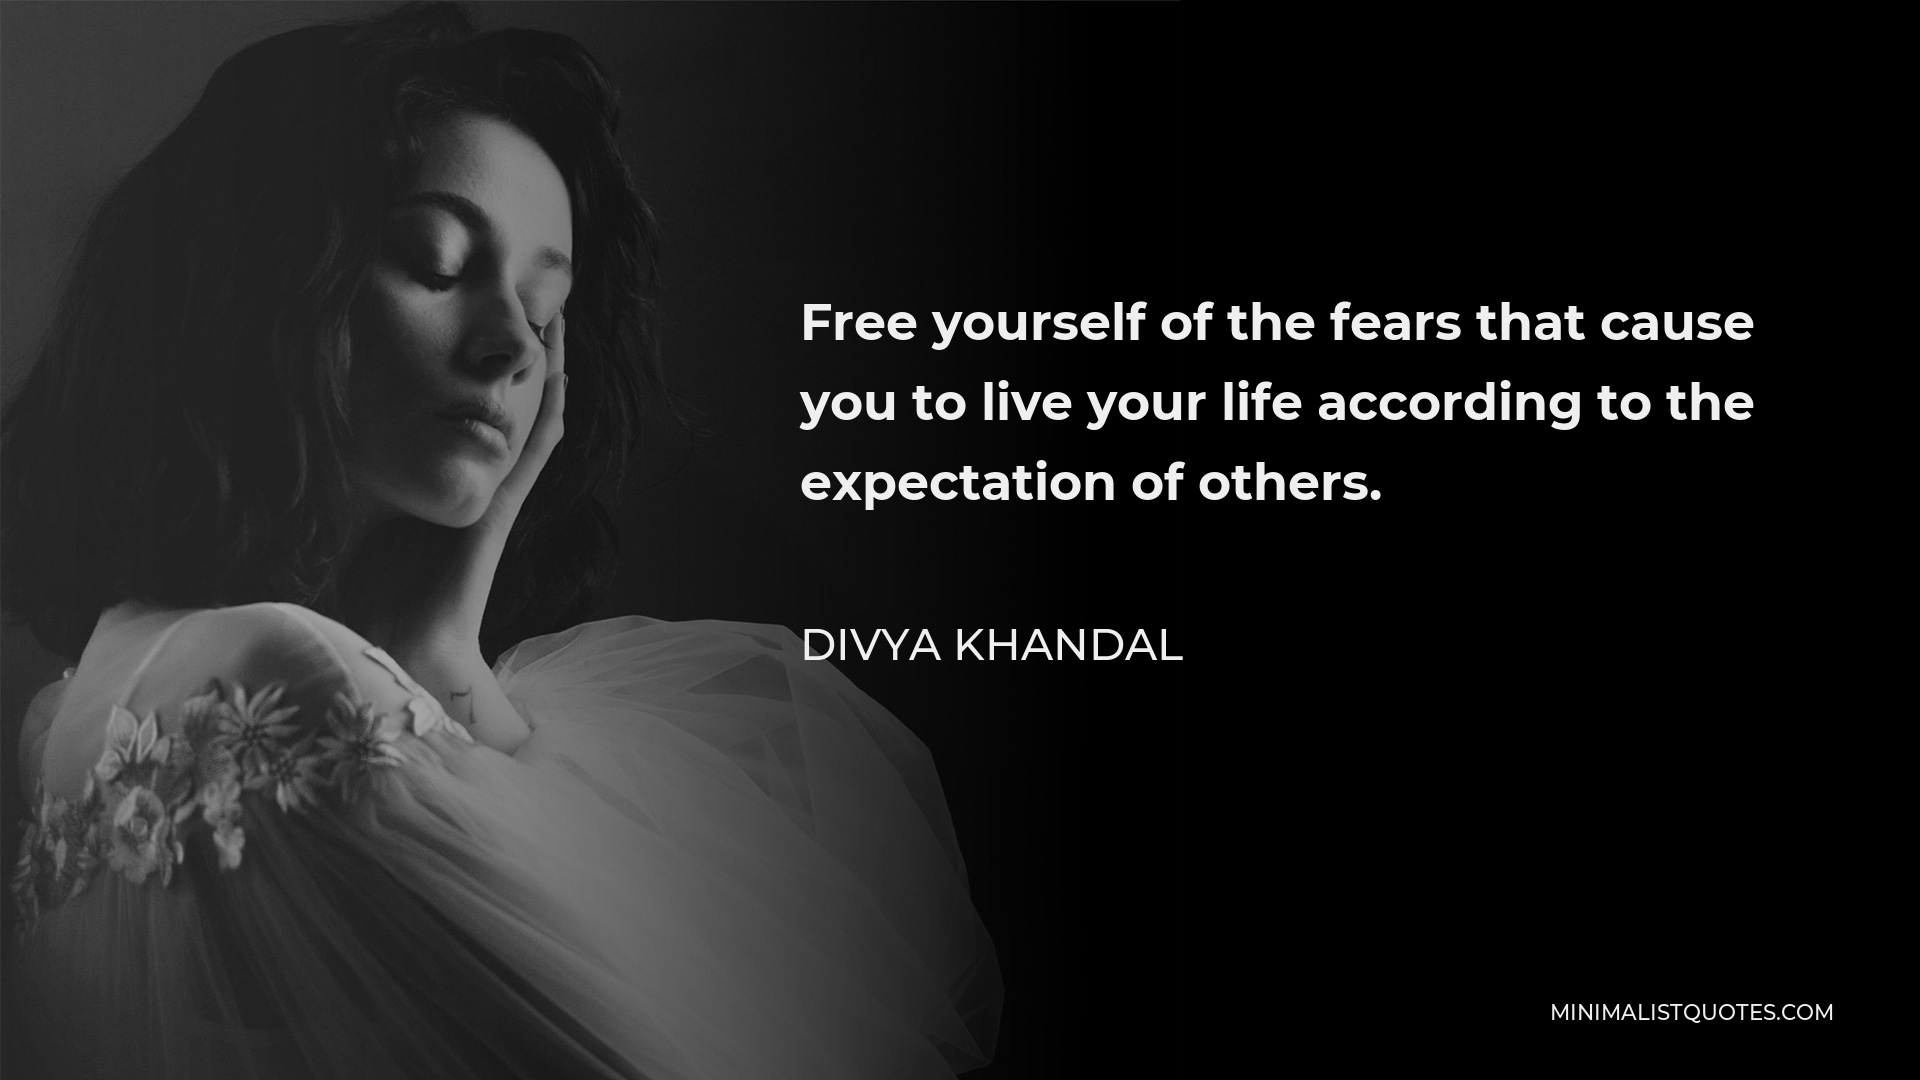 Divya khandal Quote - Free yourself of the fears that cause you to live your life according to the expectation of others.